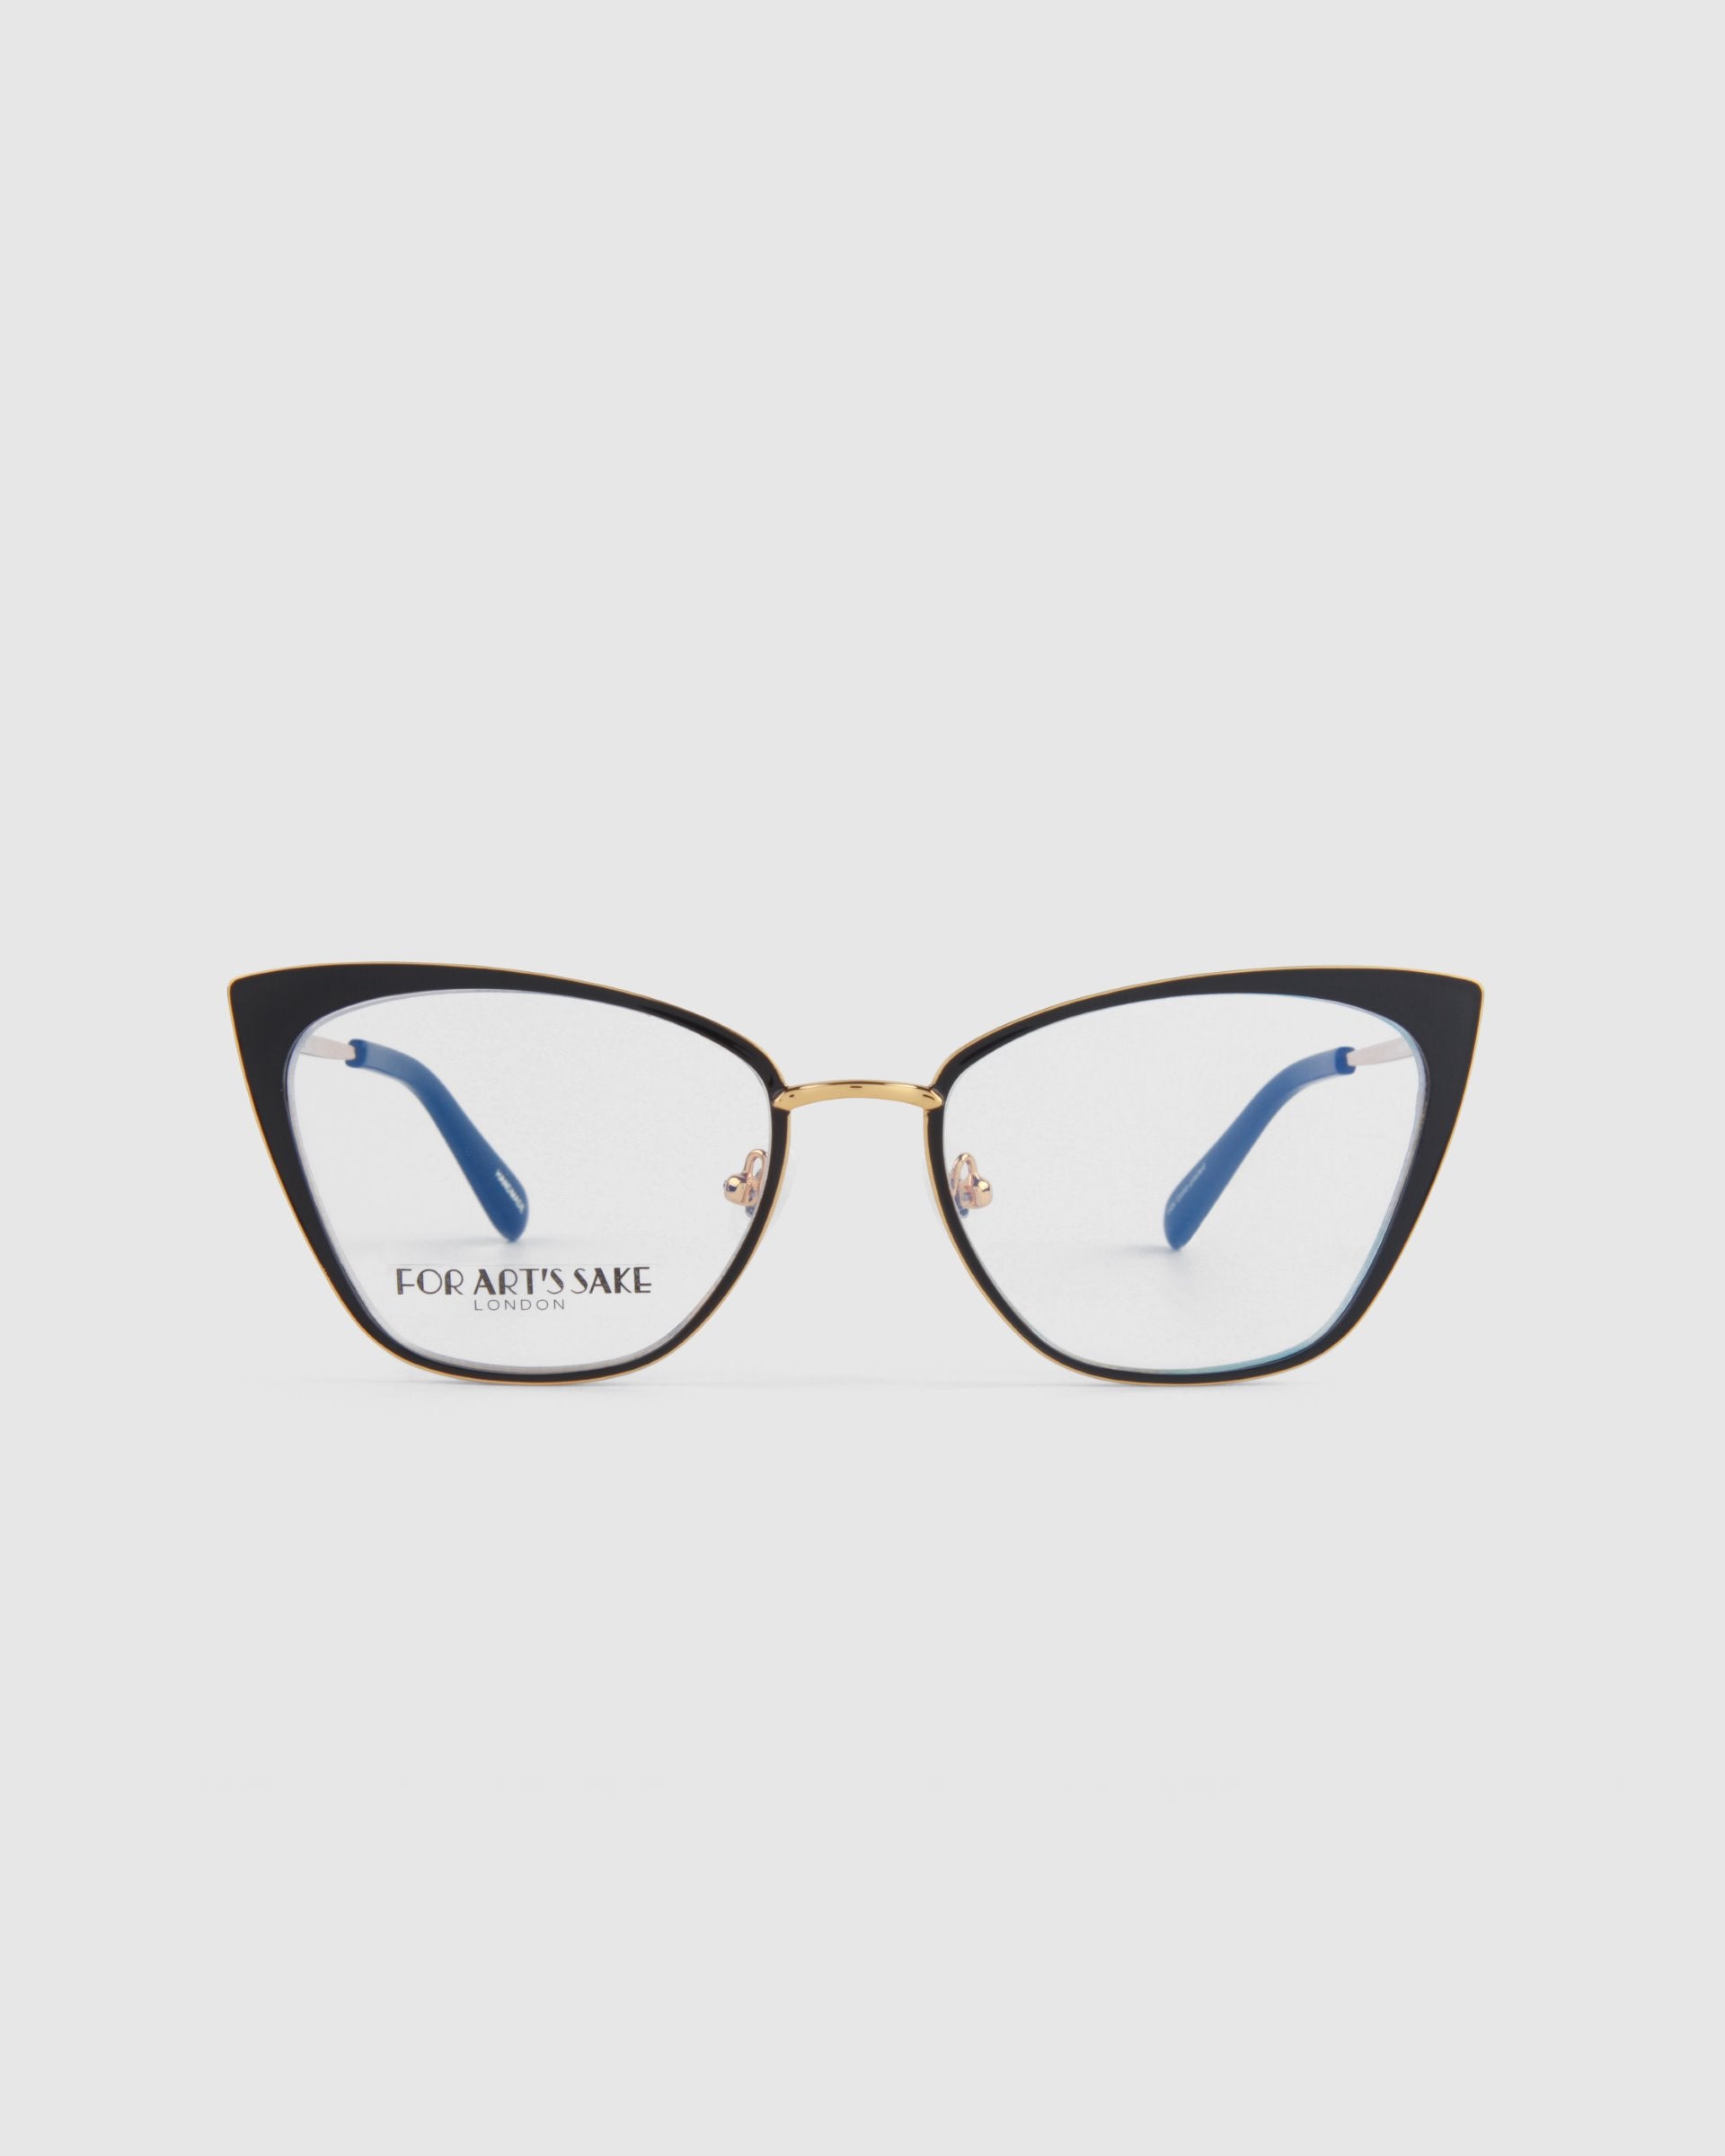 A pair of For Art&#39;s Sake® Stella Two stylish cat-eye glasses with black and 14kt gold-plated frames. The temples have a sleek design with blue ear tips. The lenses are clear and equipped with Blue Light Filter, and the words &quot;FOR ART&#39;S SAKE&quot; are printed on the left lens. The background is plain white.